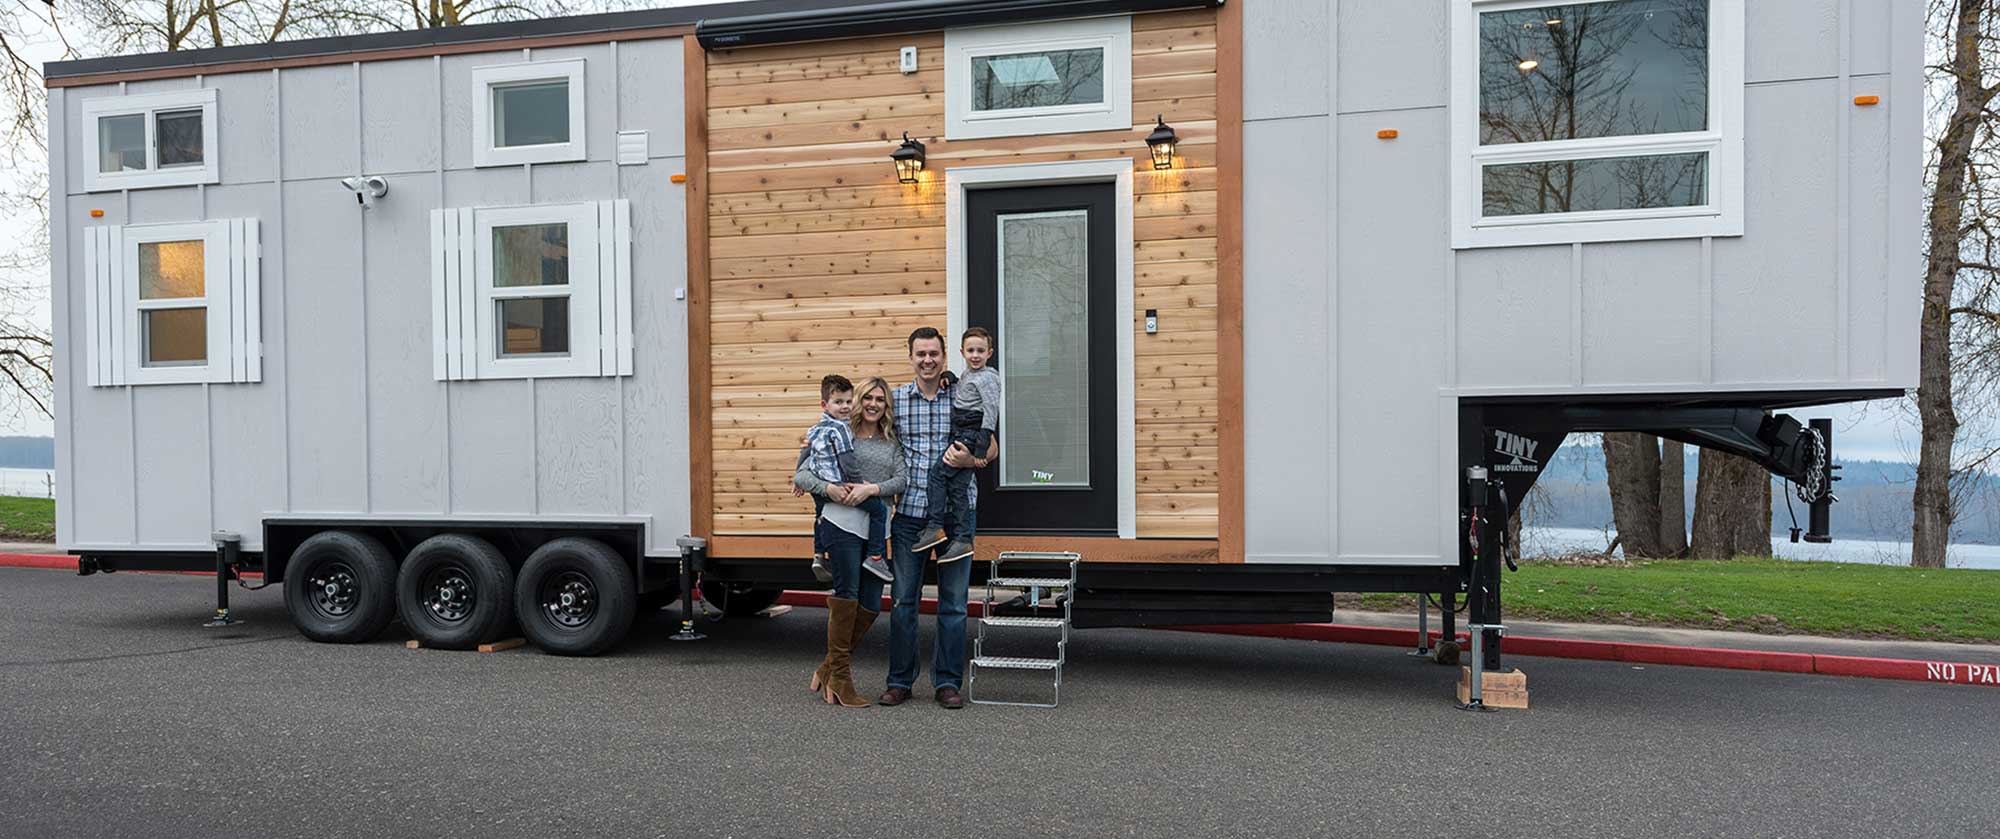 The Lawrence family poses happily in front of their Tiny Heirloom tiny home